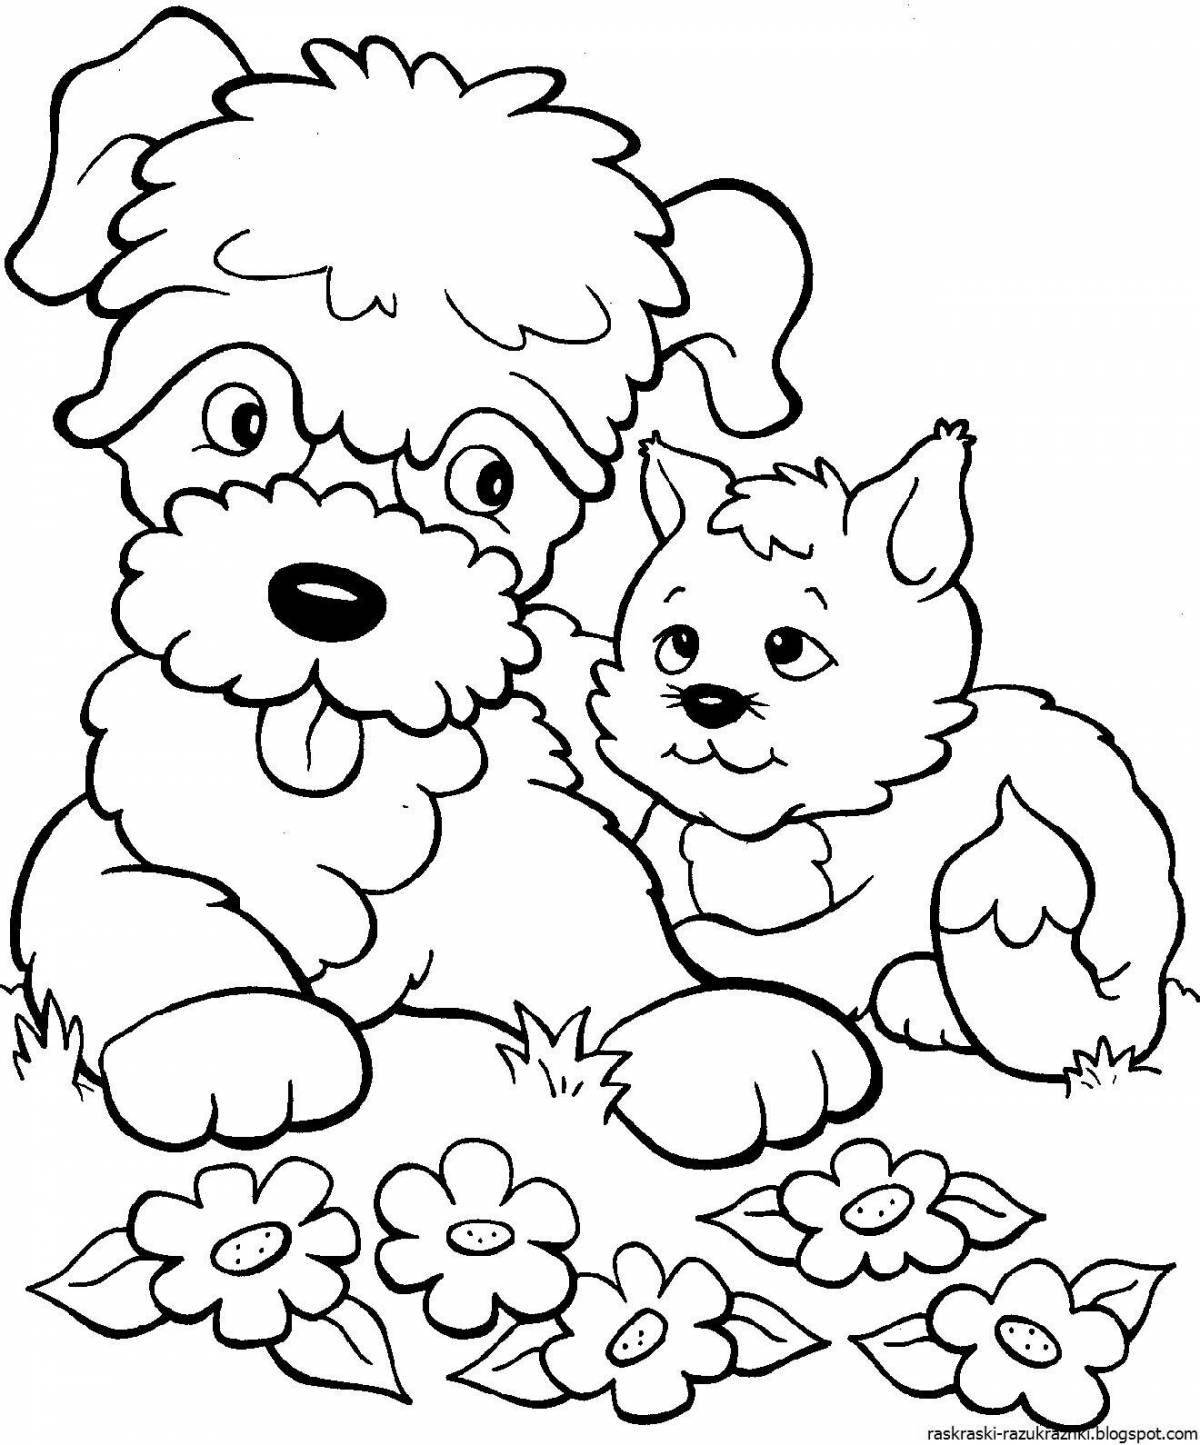 Live coloring for puppy girls